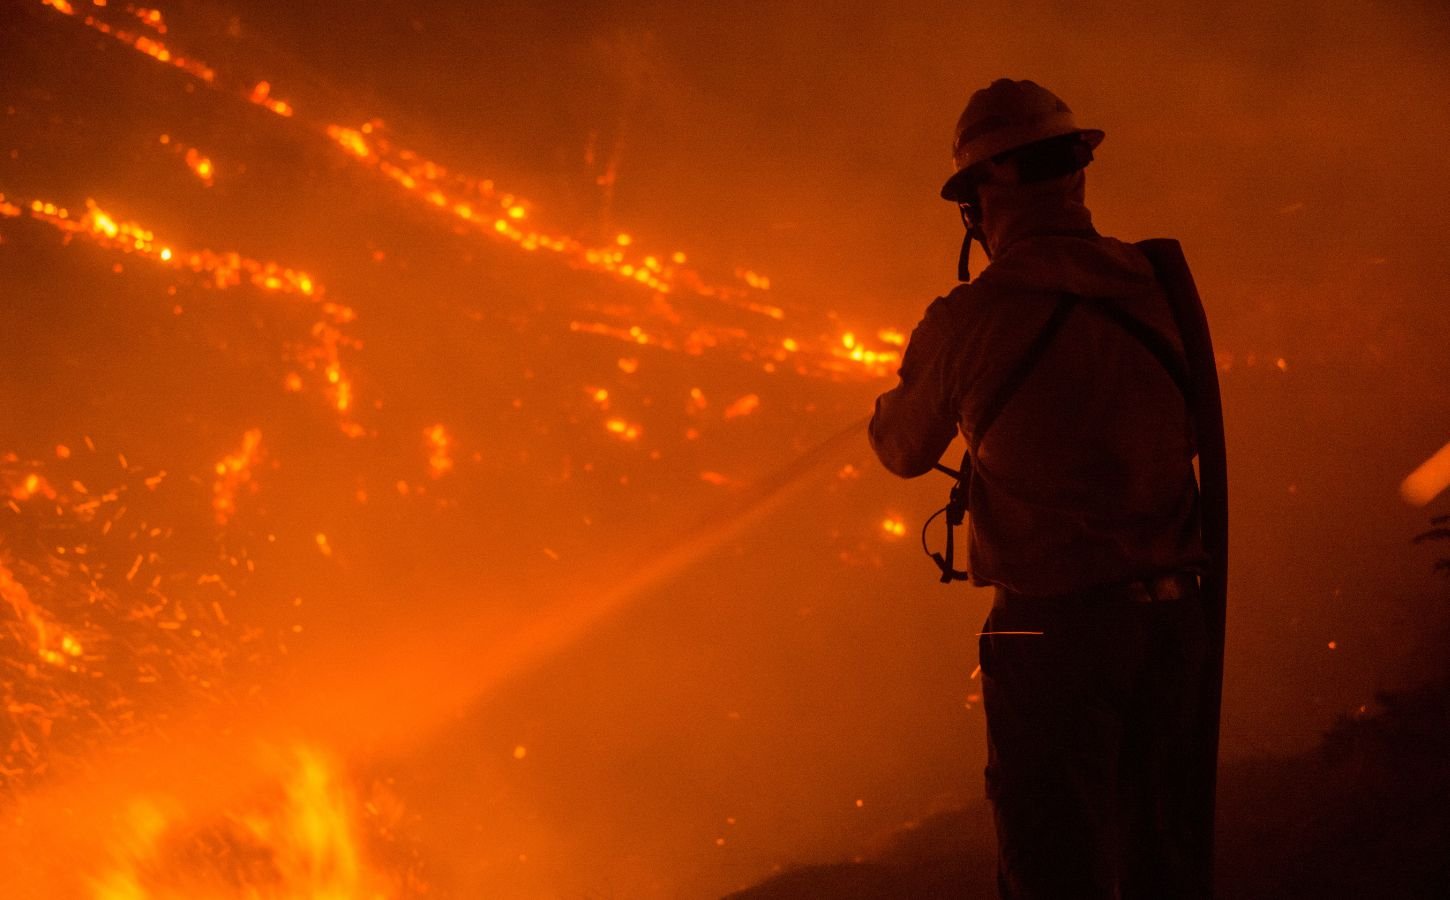 Photo shows the silhouette of a firefighter as they tackle a wildfire at night